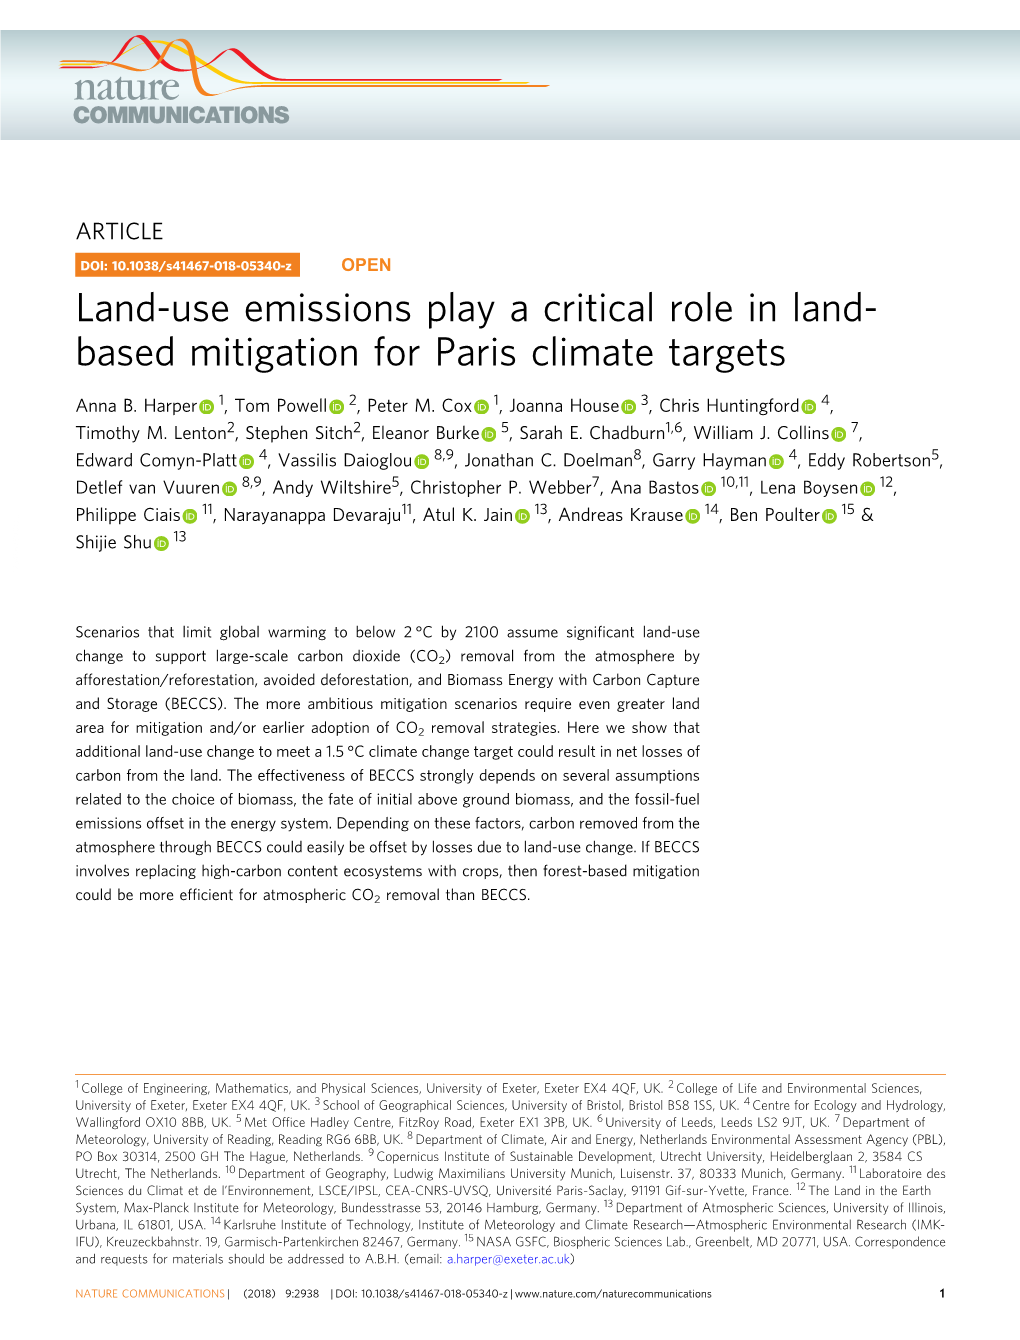 Land-Use Emissions Play a Critical Role in Land- Based Mitigation for Paris Climate Targets